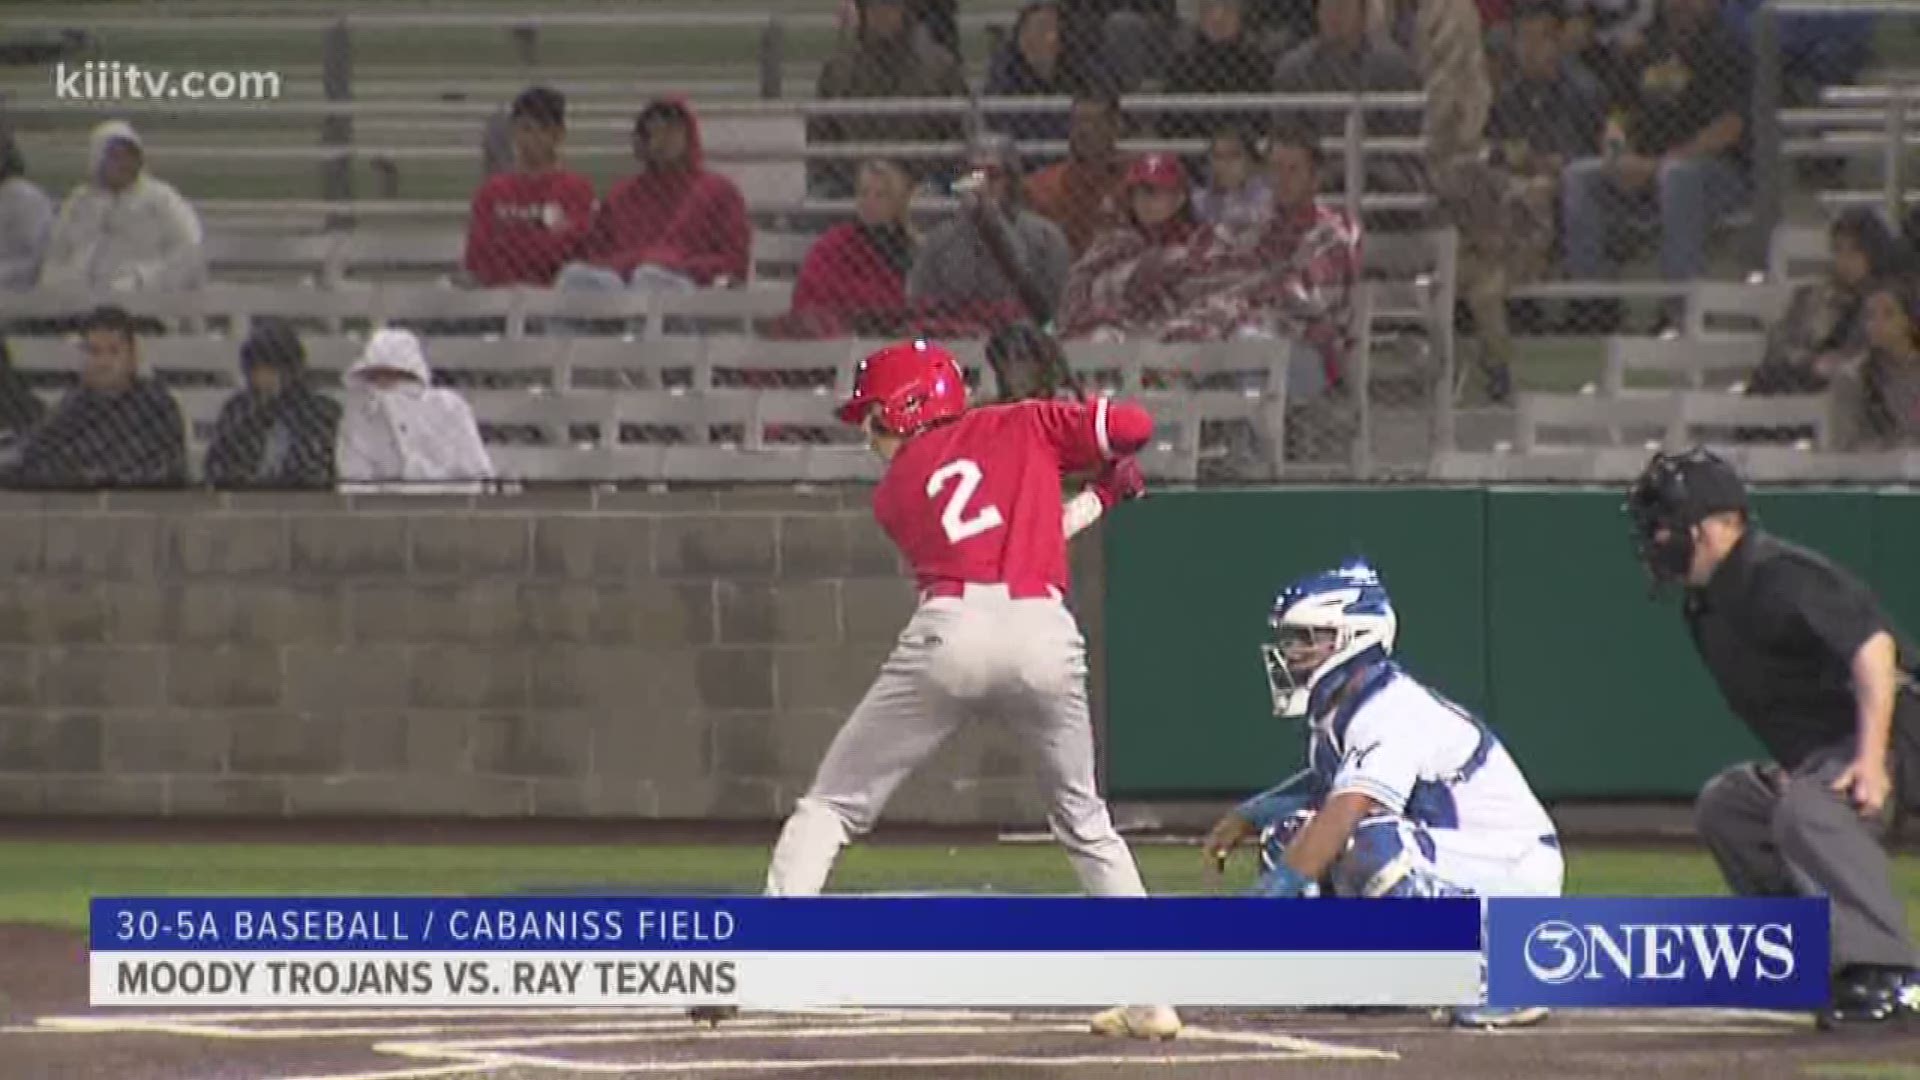 The Texans started their baseball season with a 4-1 win over the Trojans.